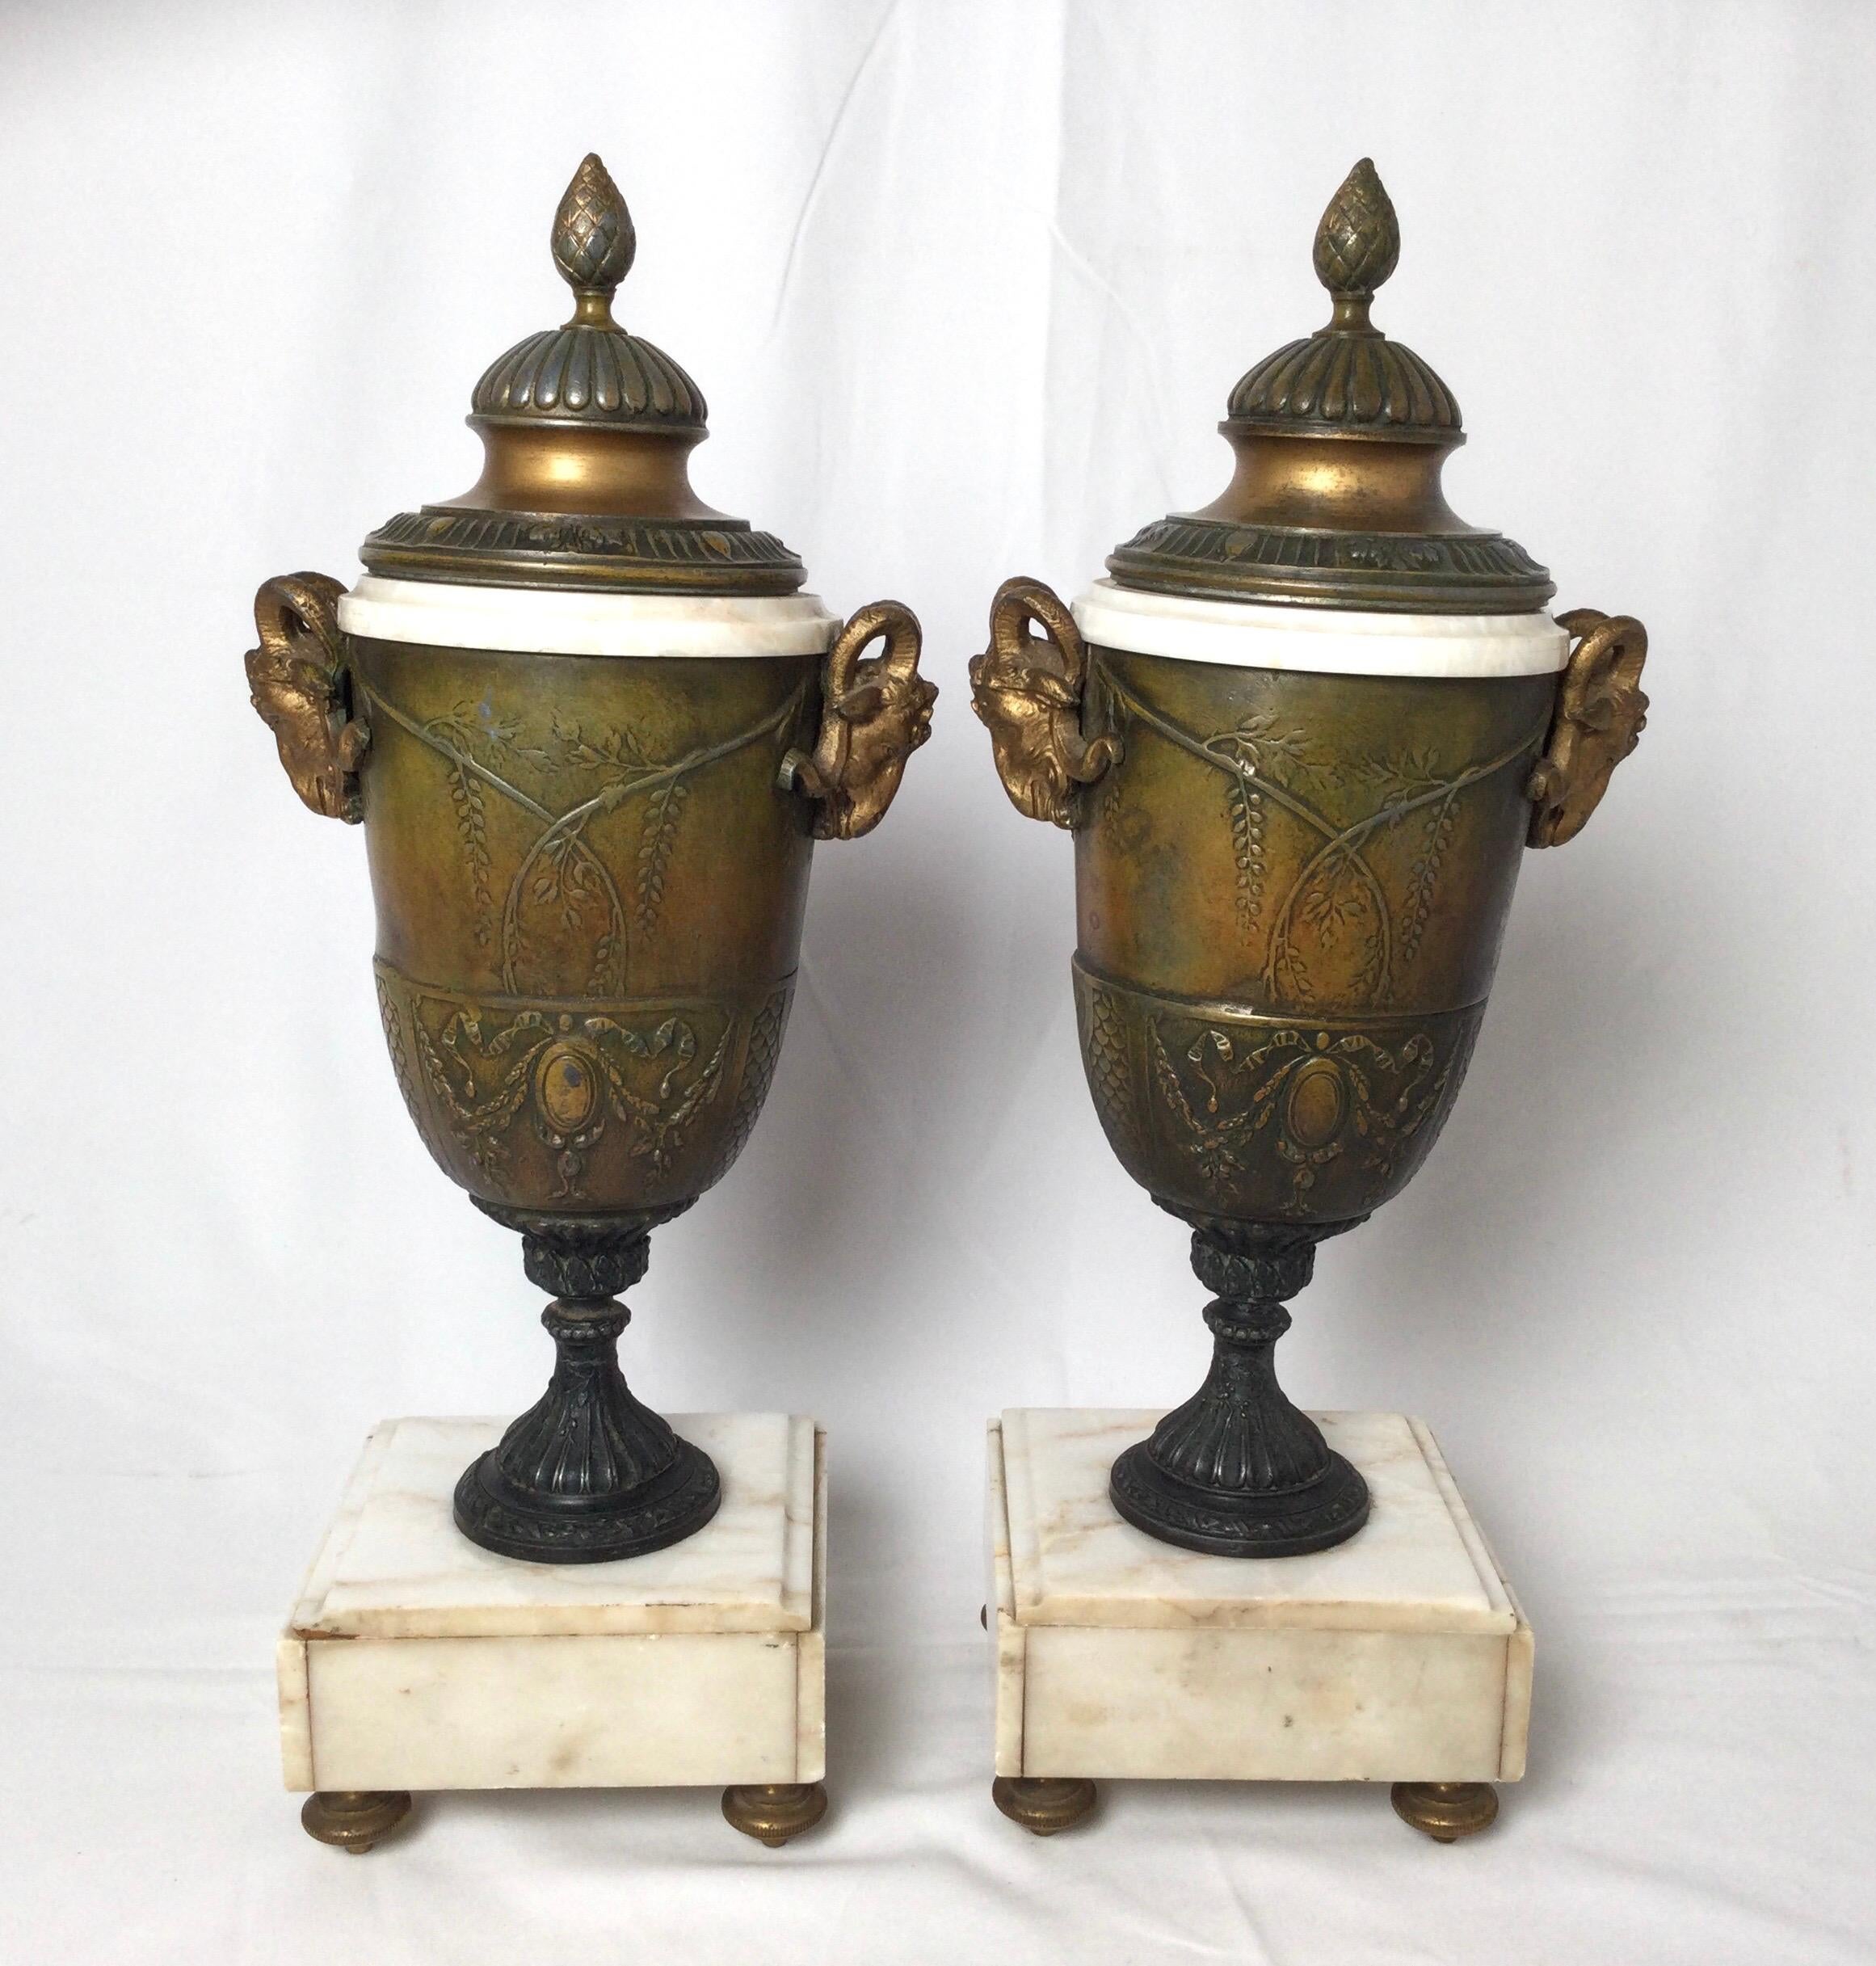 Pair of French Style Marble and Patinated Metal Garniture Urns with Rams Heads For Sale 2